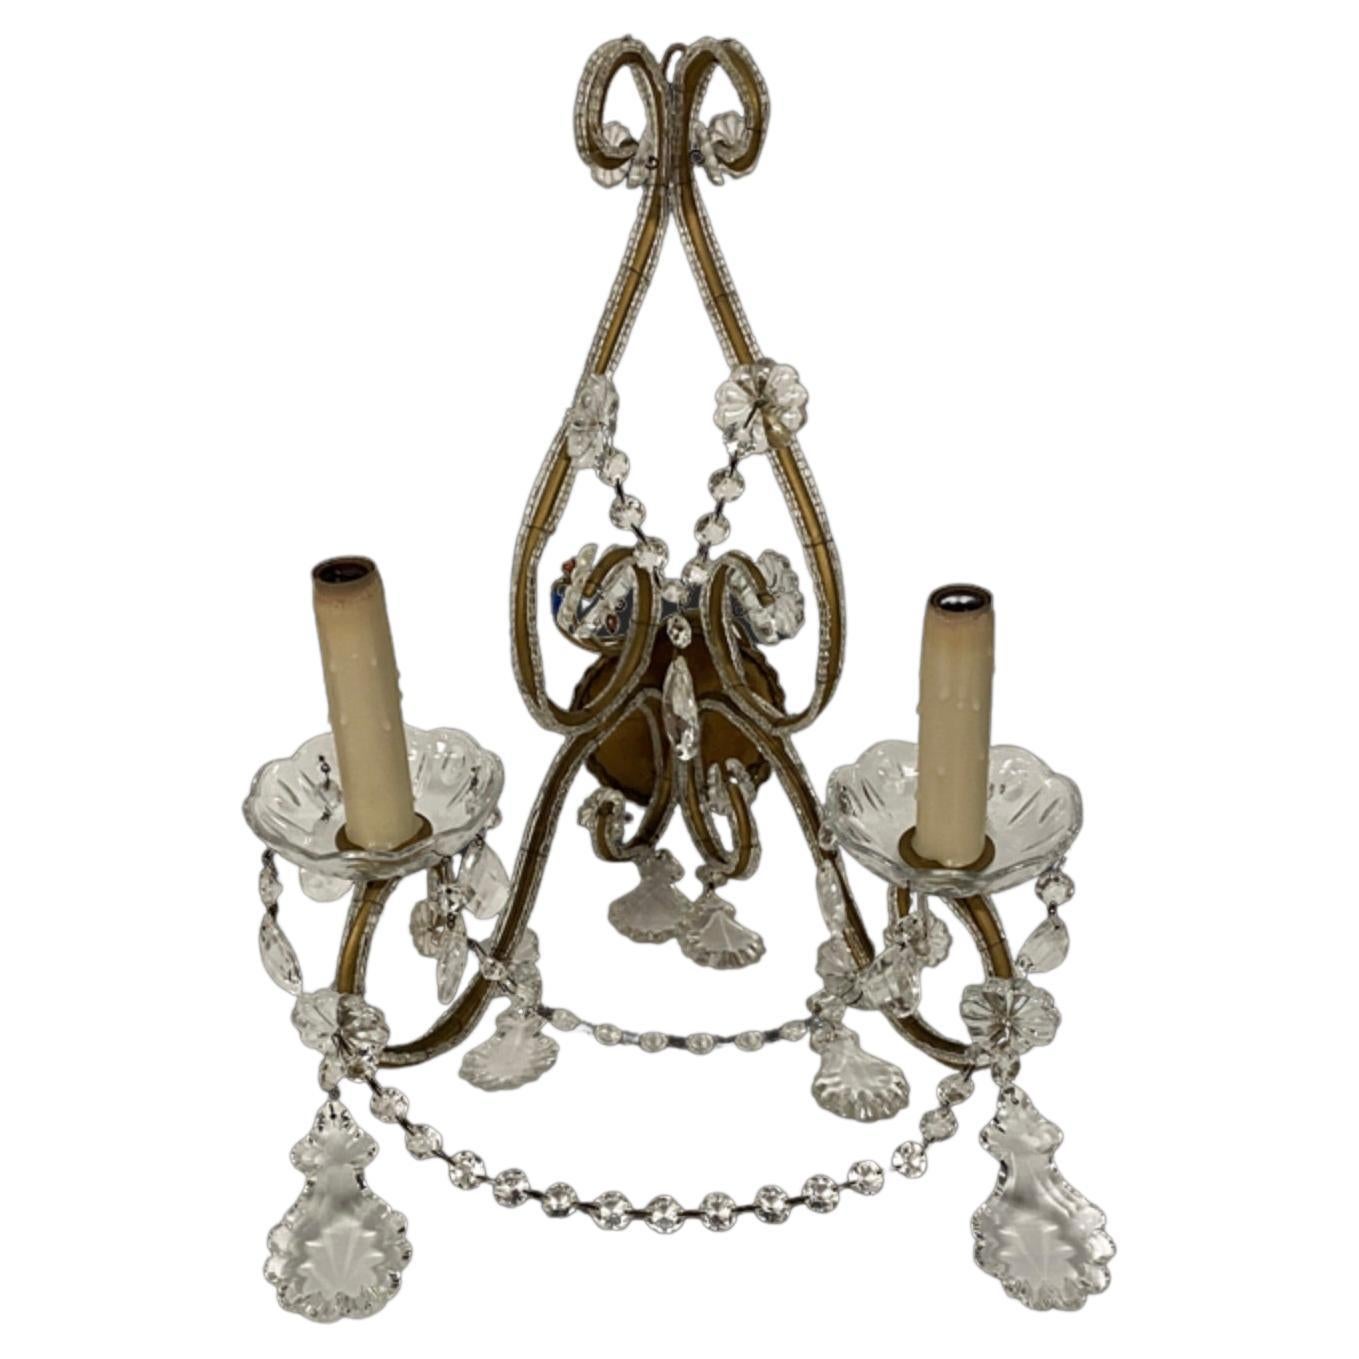 Pair of Beaded Crystal Wall Sconces